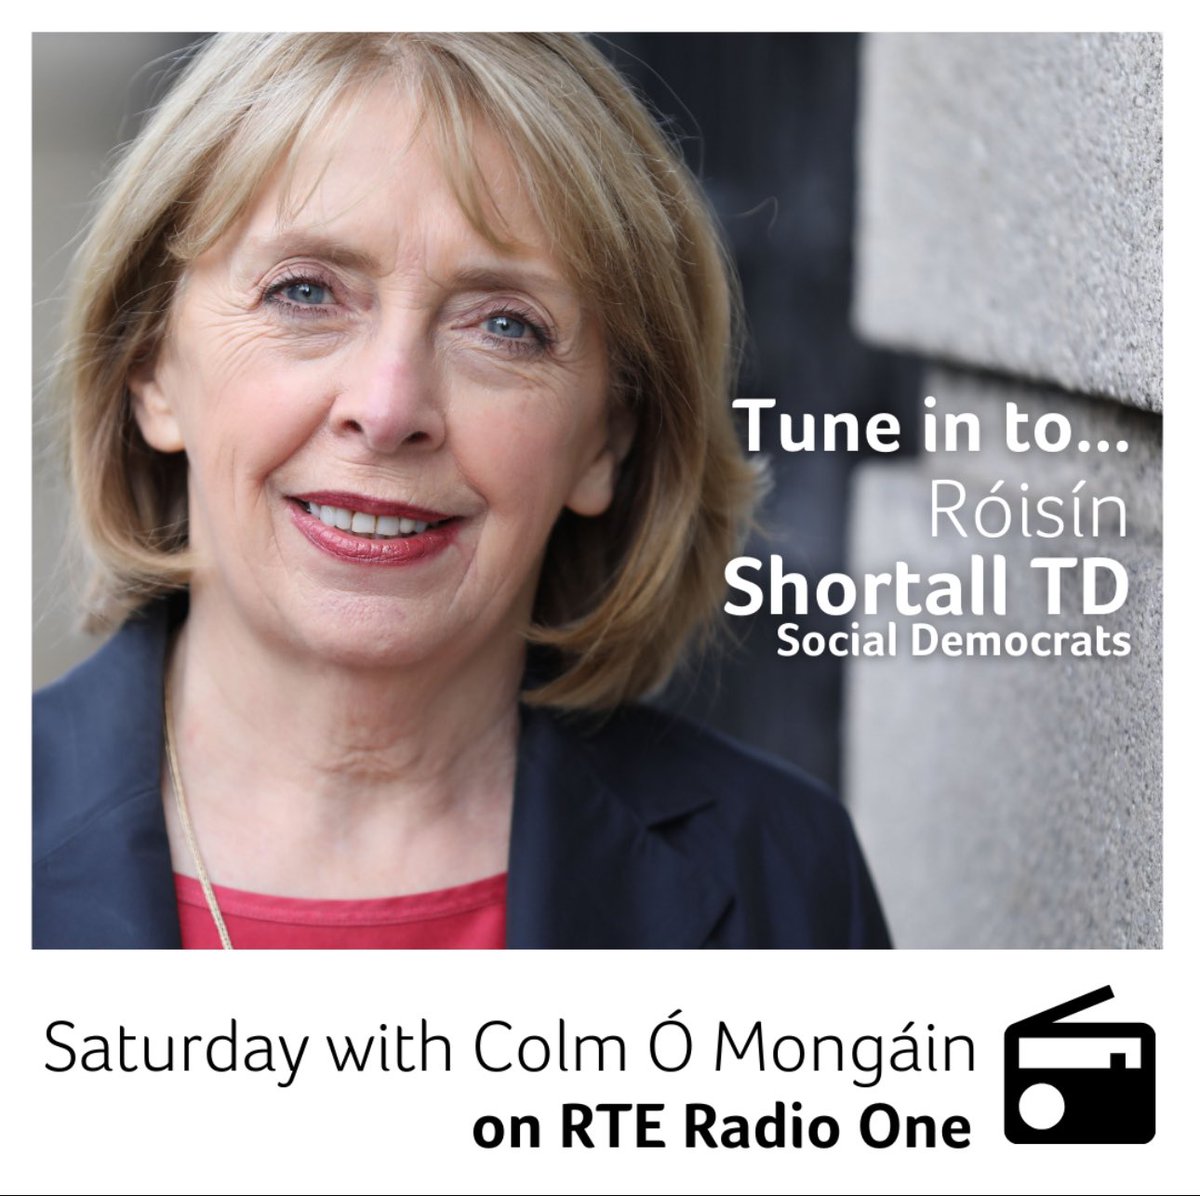 Coming up on @SaturdayRTE, @RoisinShortall will be joining the show. Tune in from 1pm 📻